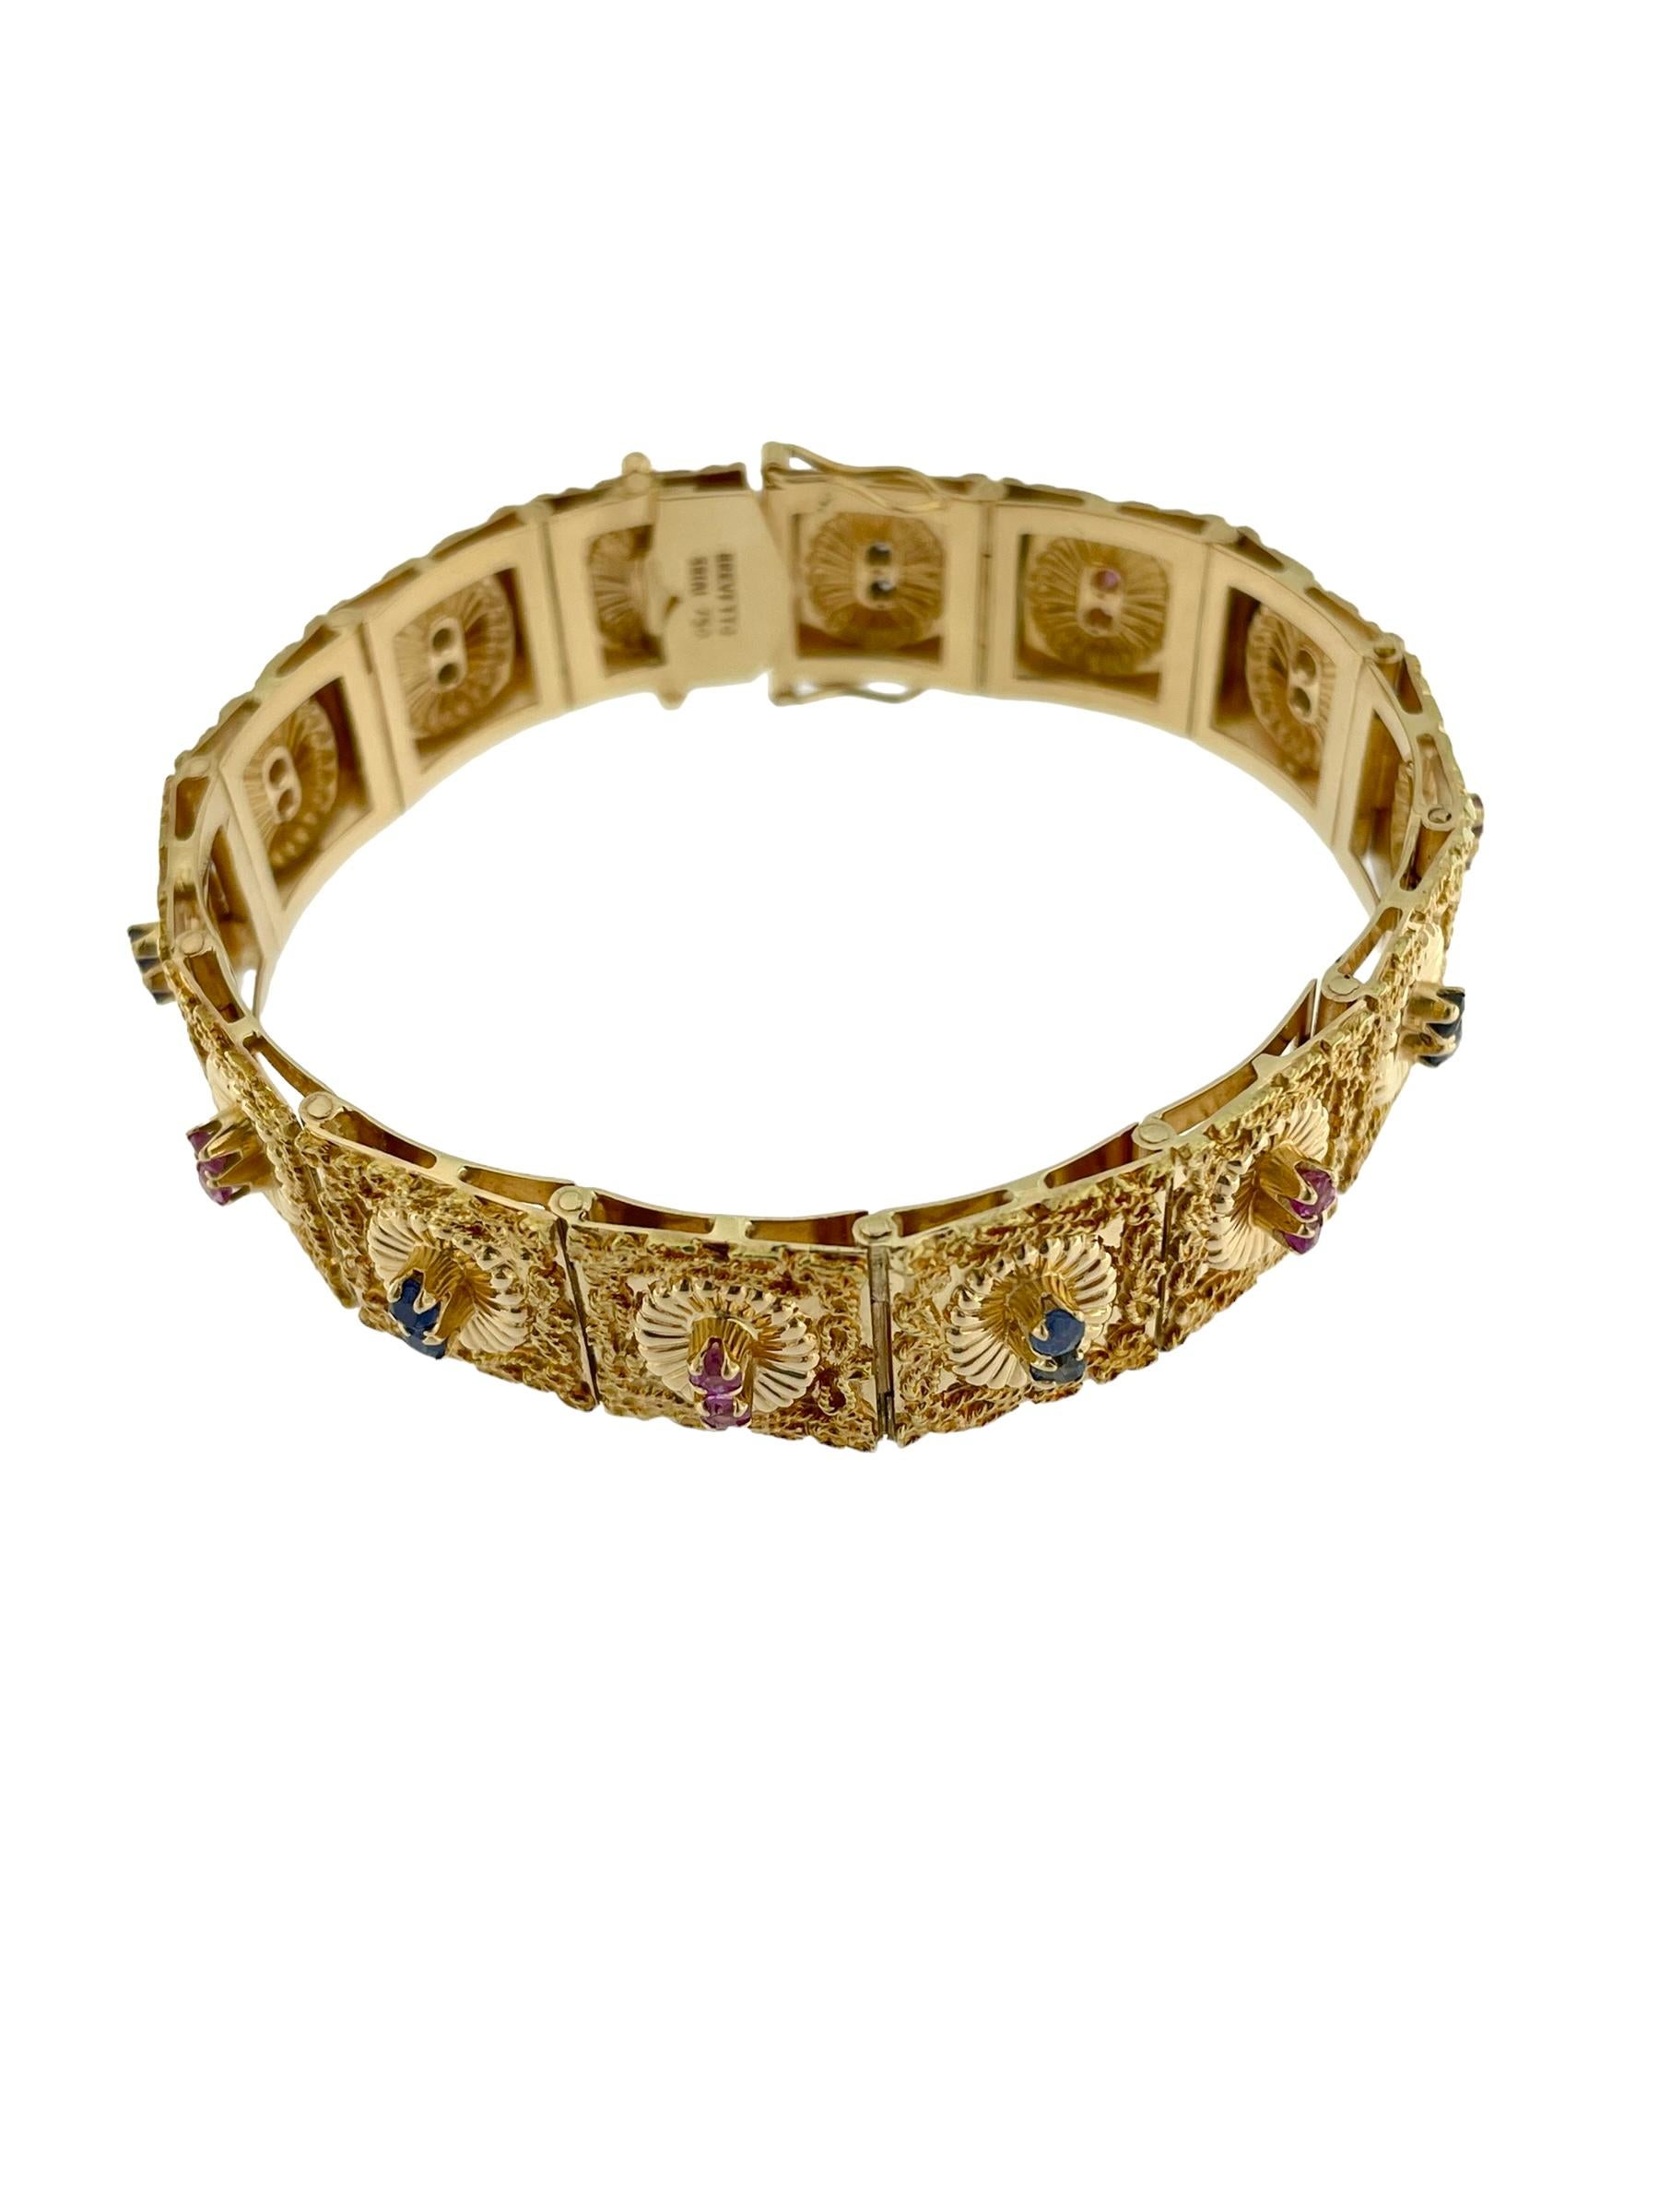 Retro Bracelet by Brevetto Yellow Gold Rubies and Sapphires For Sale 3